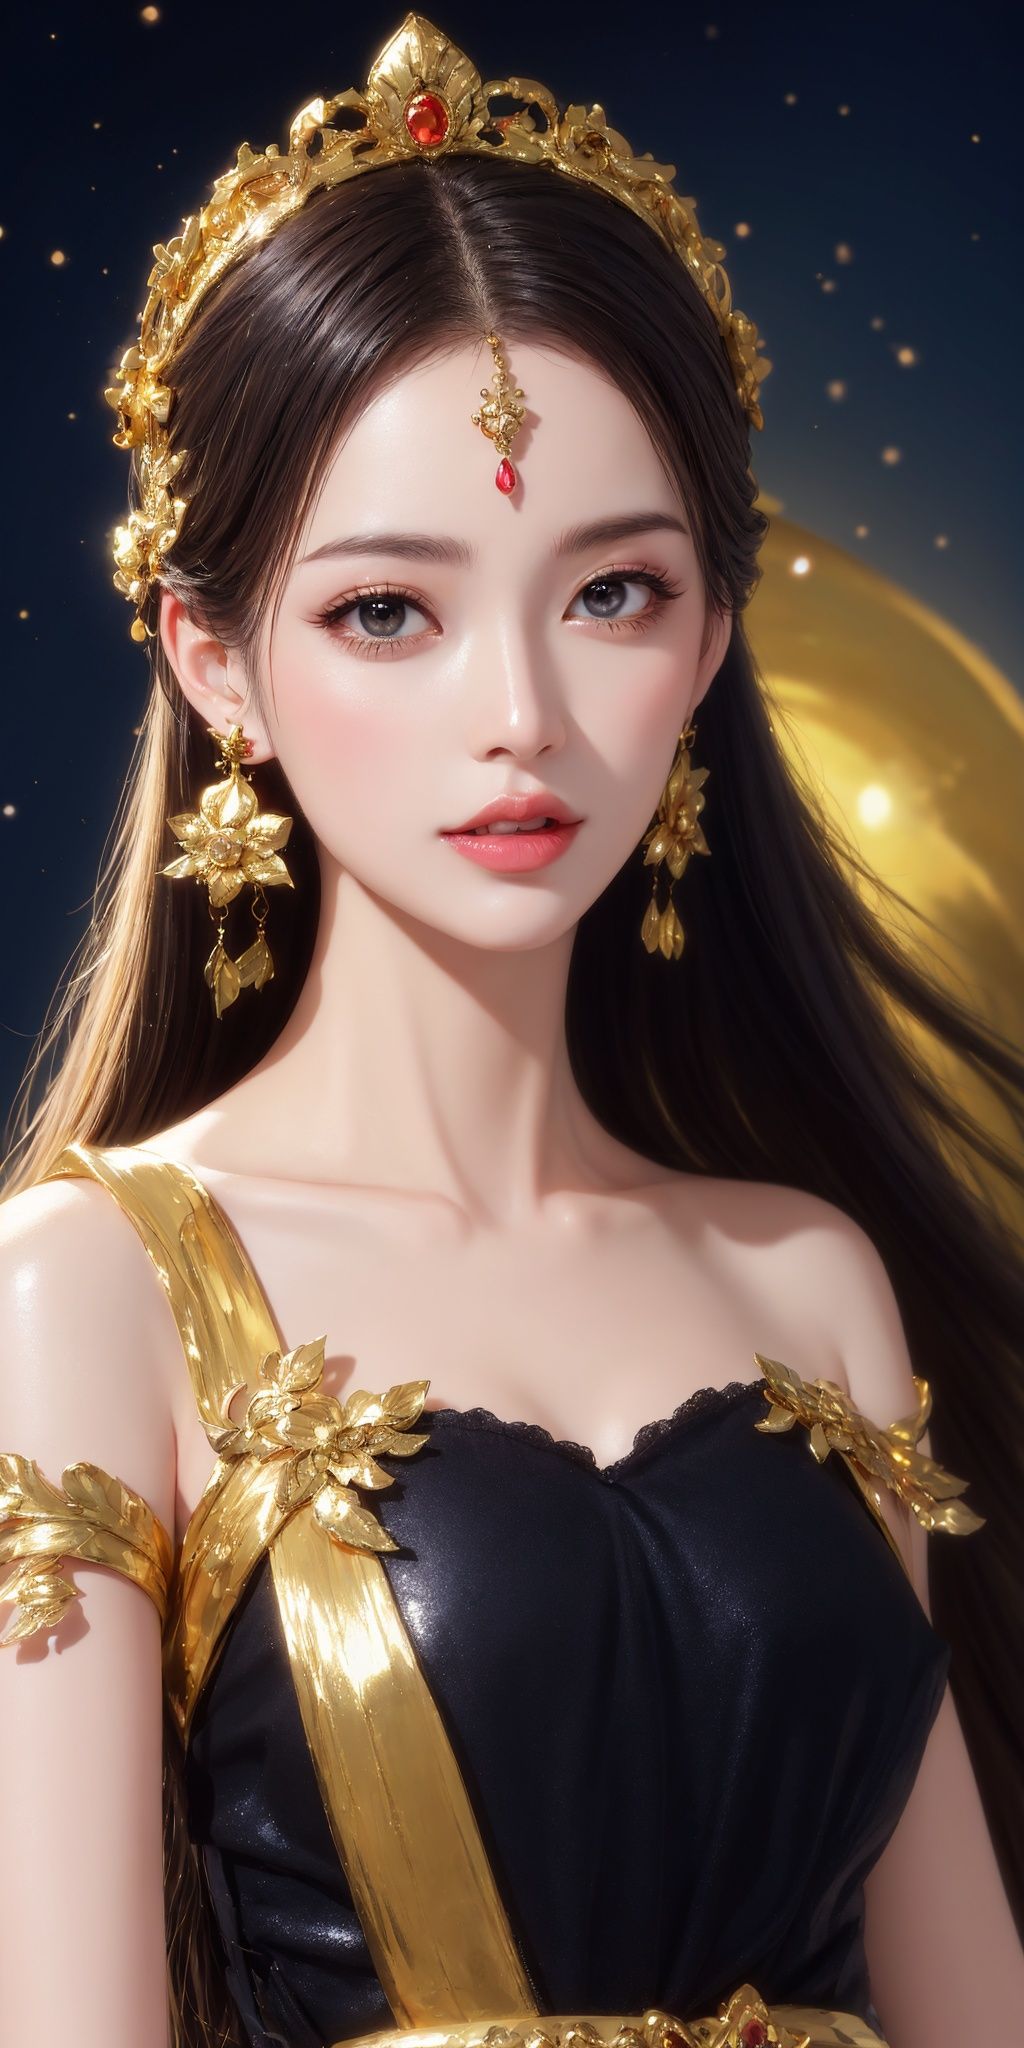 ((Half body photo)), facial close-up of a girl, long hair, gold headdress, gold earrings, gold streamers, off shoulder, (black dress, black dress), dark lines, gold decorations, sun, moon, holy, orange light, starry sky, night sky, cosmic background, goddess, beauty, clear eyes, correct hand painting, correct body painting